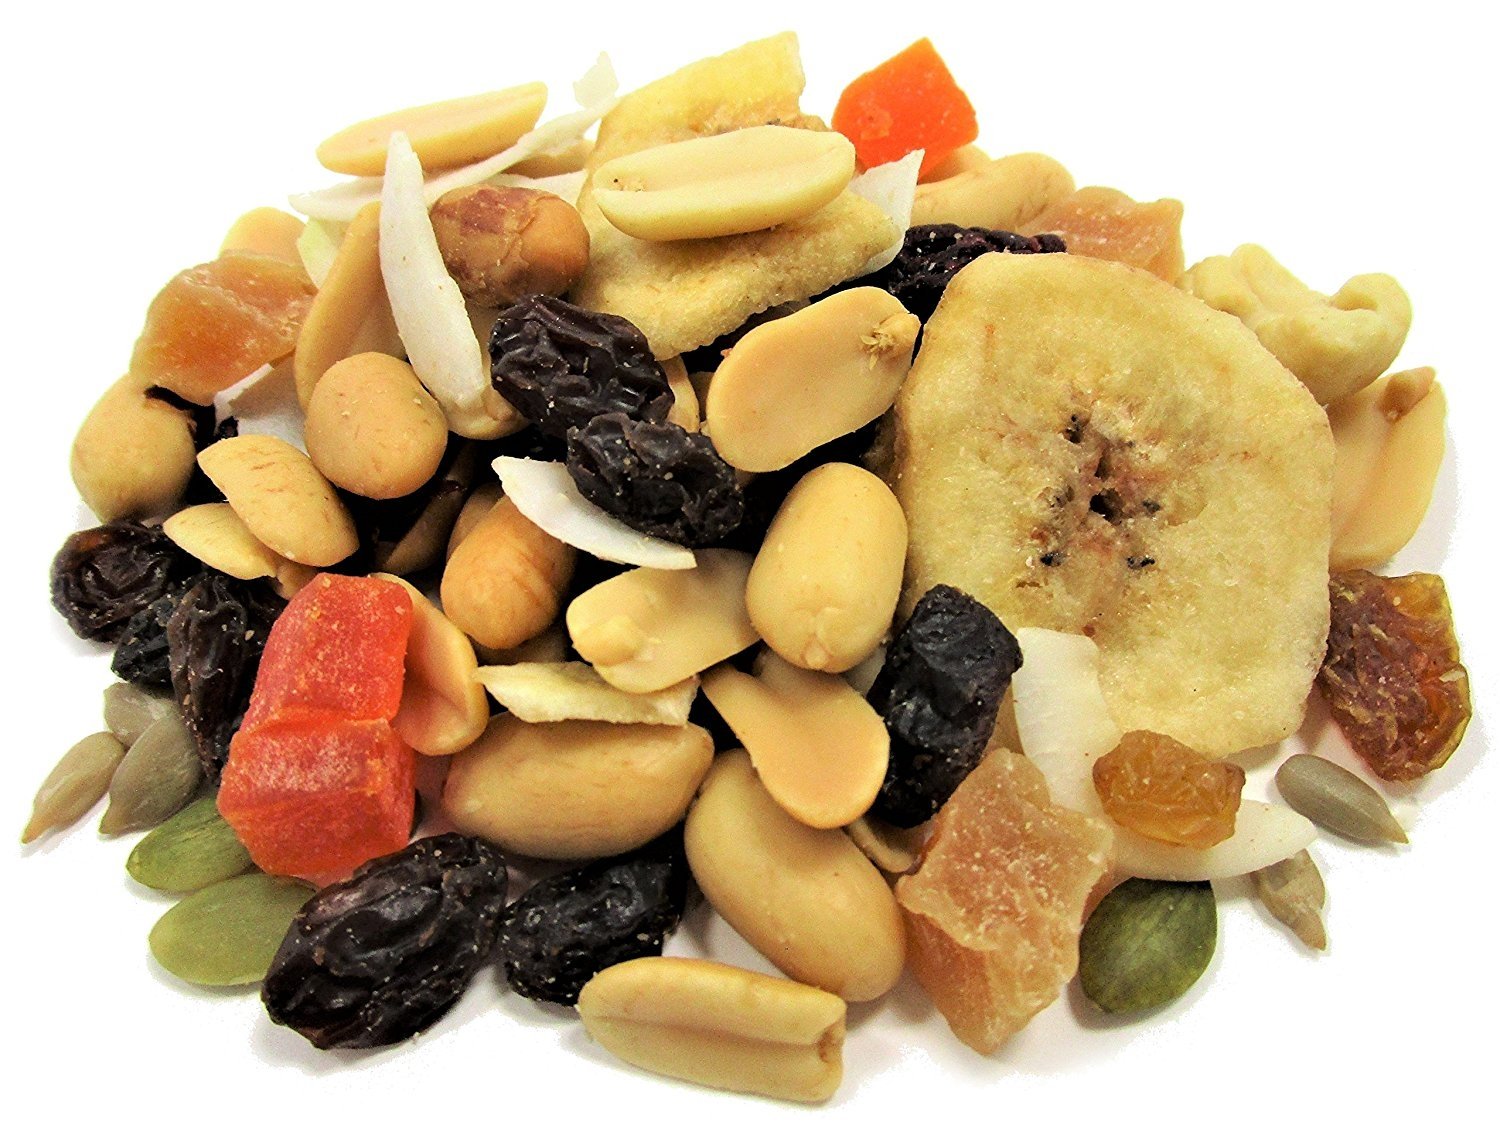 It's Delish Tropical Trail Mix  | Gourmet Mix of Nuts and Dried Fruit (10 lbs)